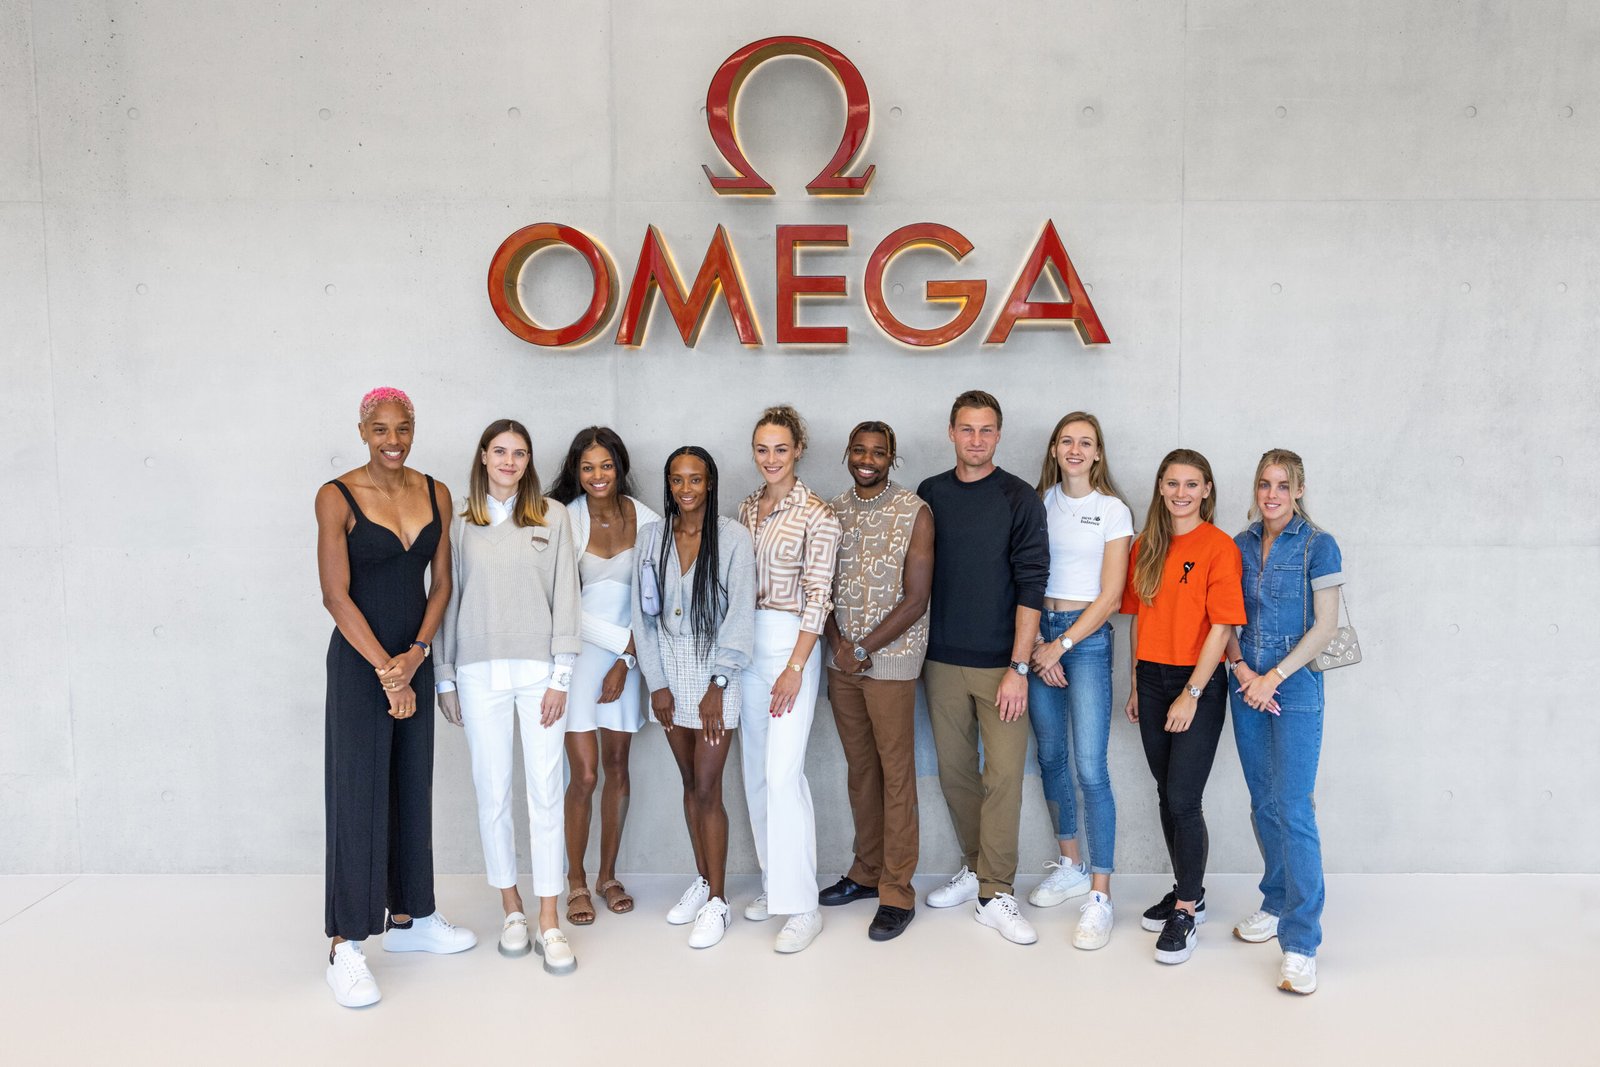 OMEGA welcomes star athletes to its watchmaking HQ